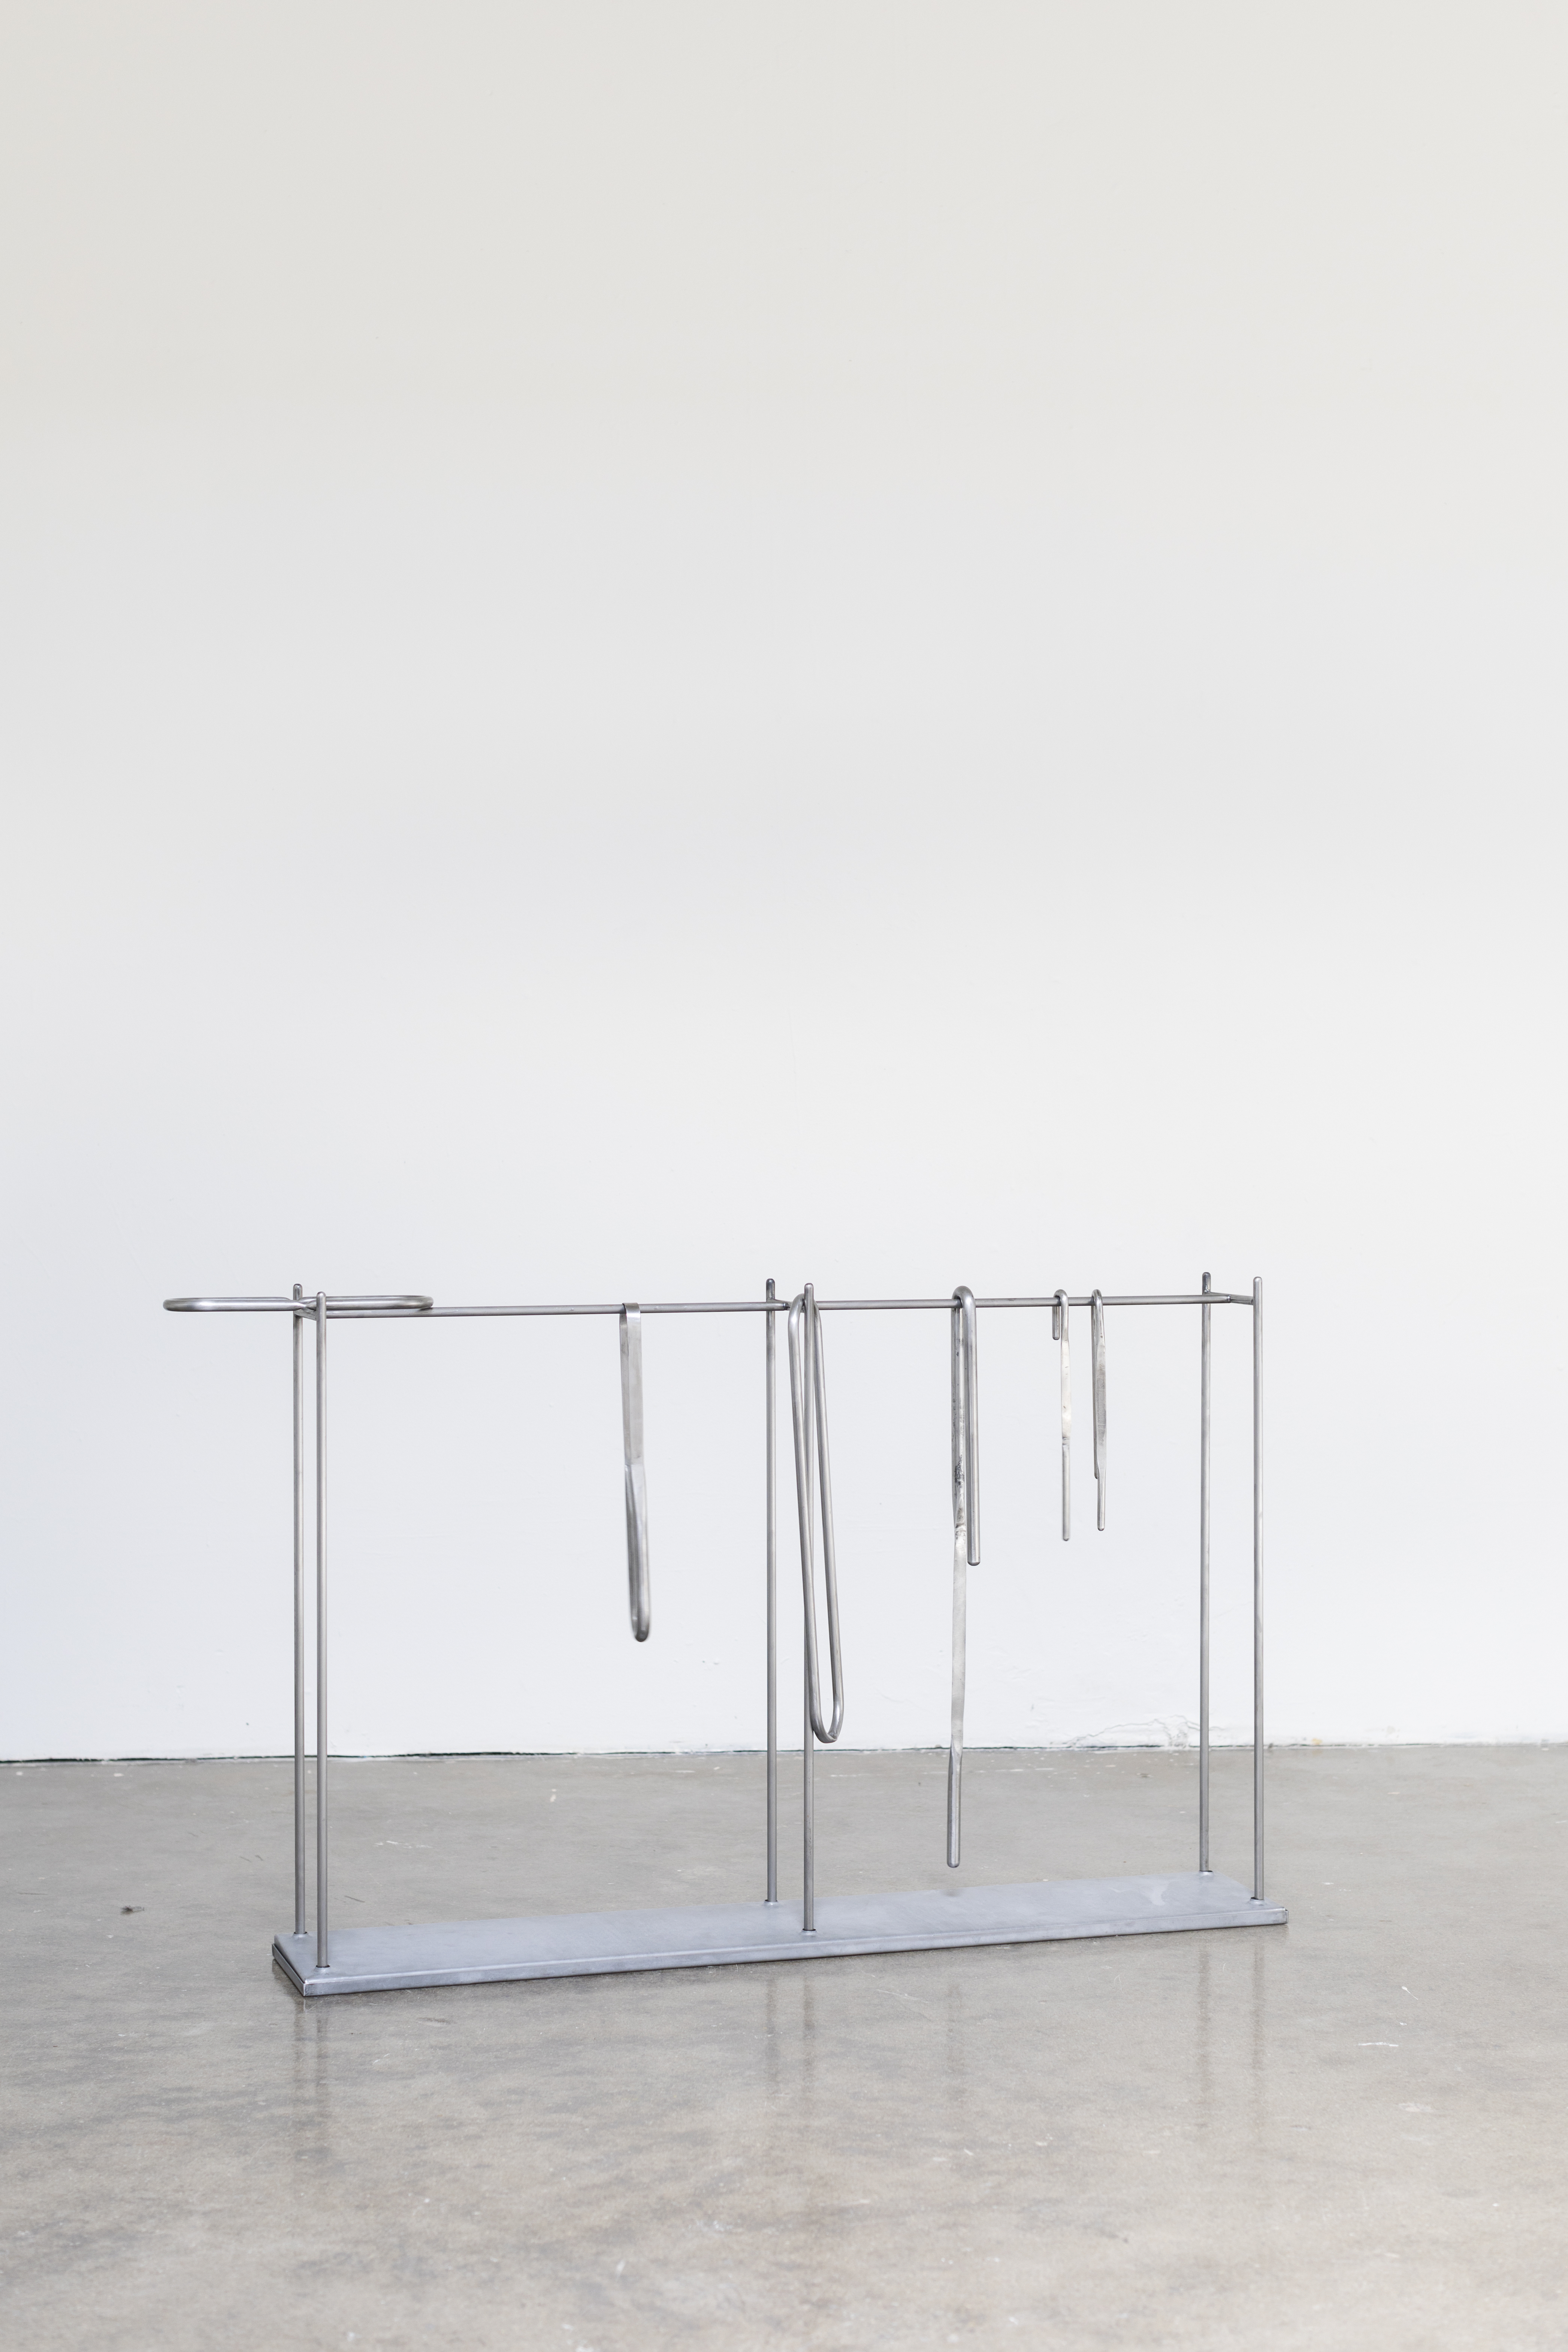 A six legged steel stand with six steel objects hooked and looped and laying on structure